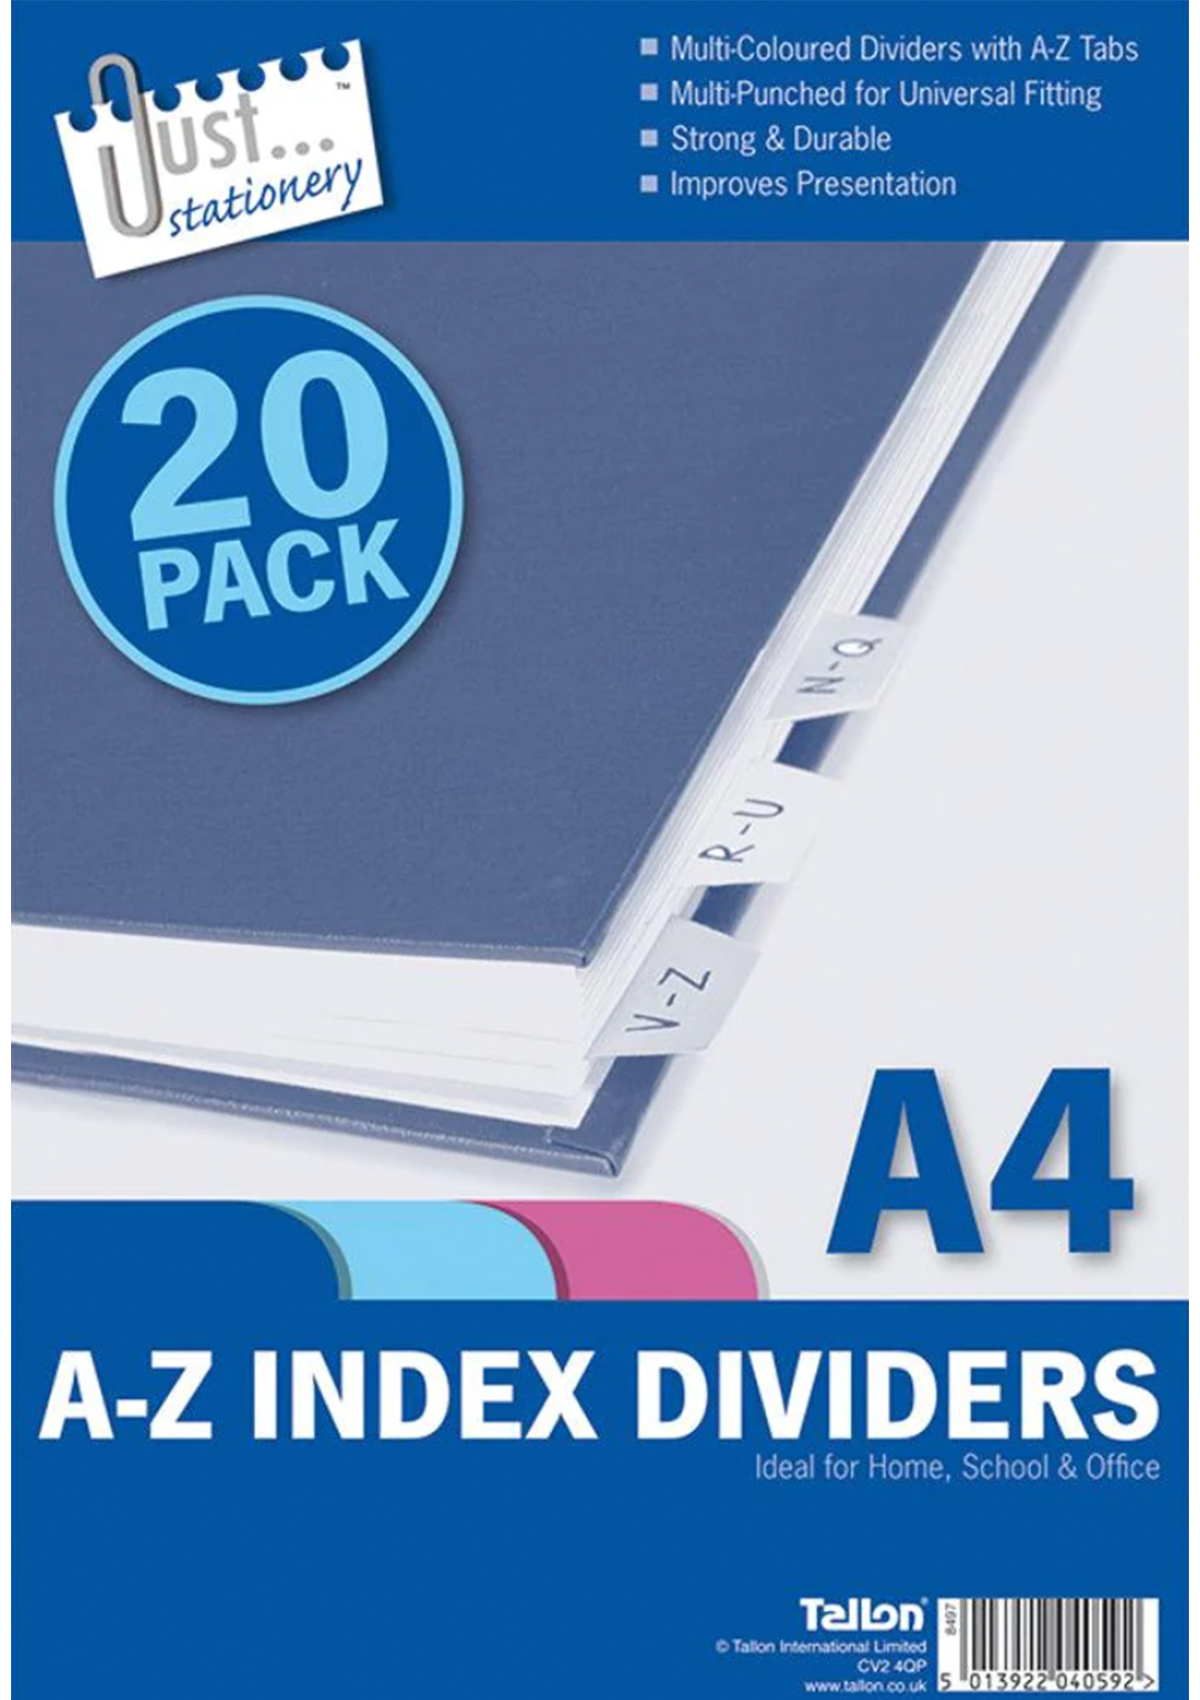 Just Stationery A-Z Index Dividers | Pack of 20